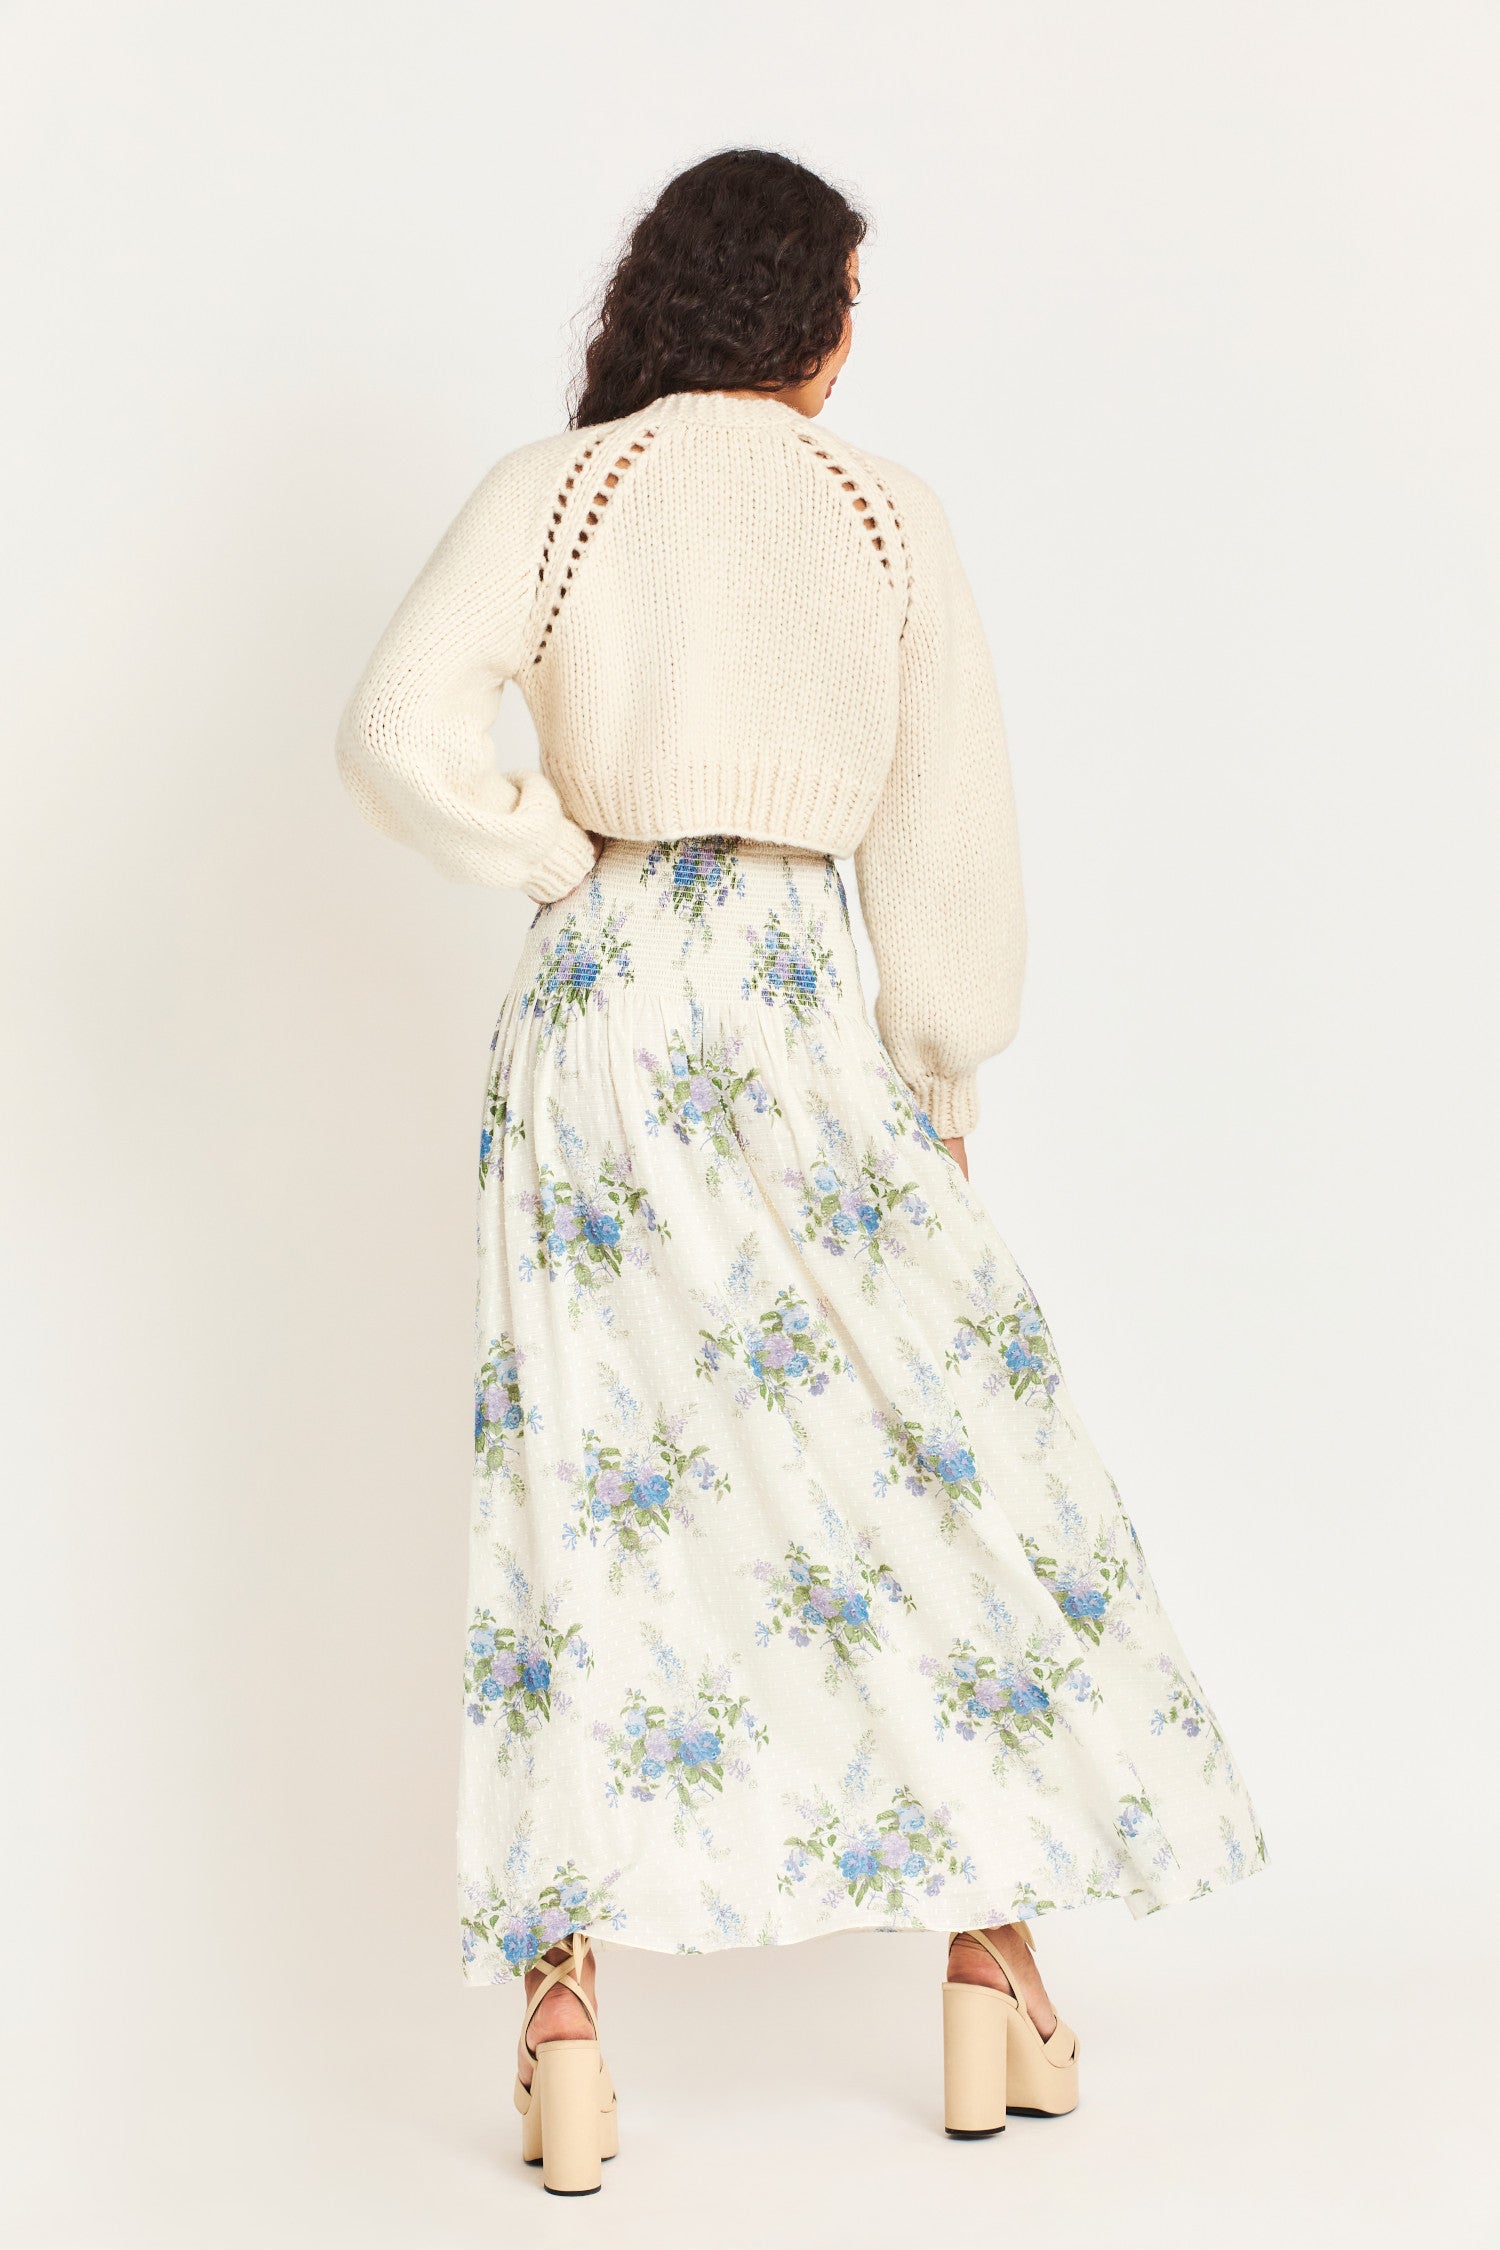 Falune Maxi skirt features an heirloom bouquet on a soft, textured white dot fabric. It has a smocked hip yoke and an added sleep for sexiness